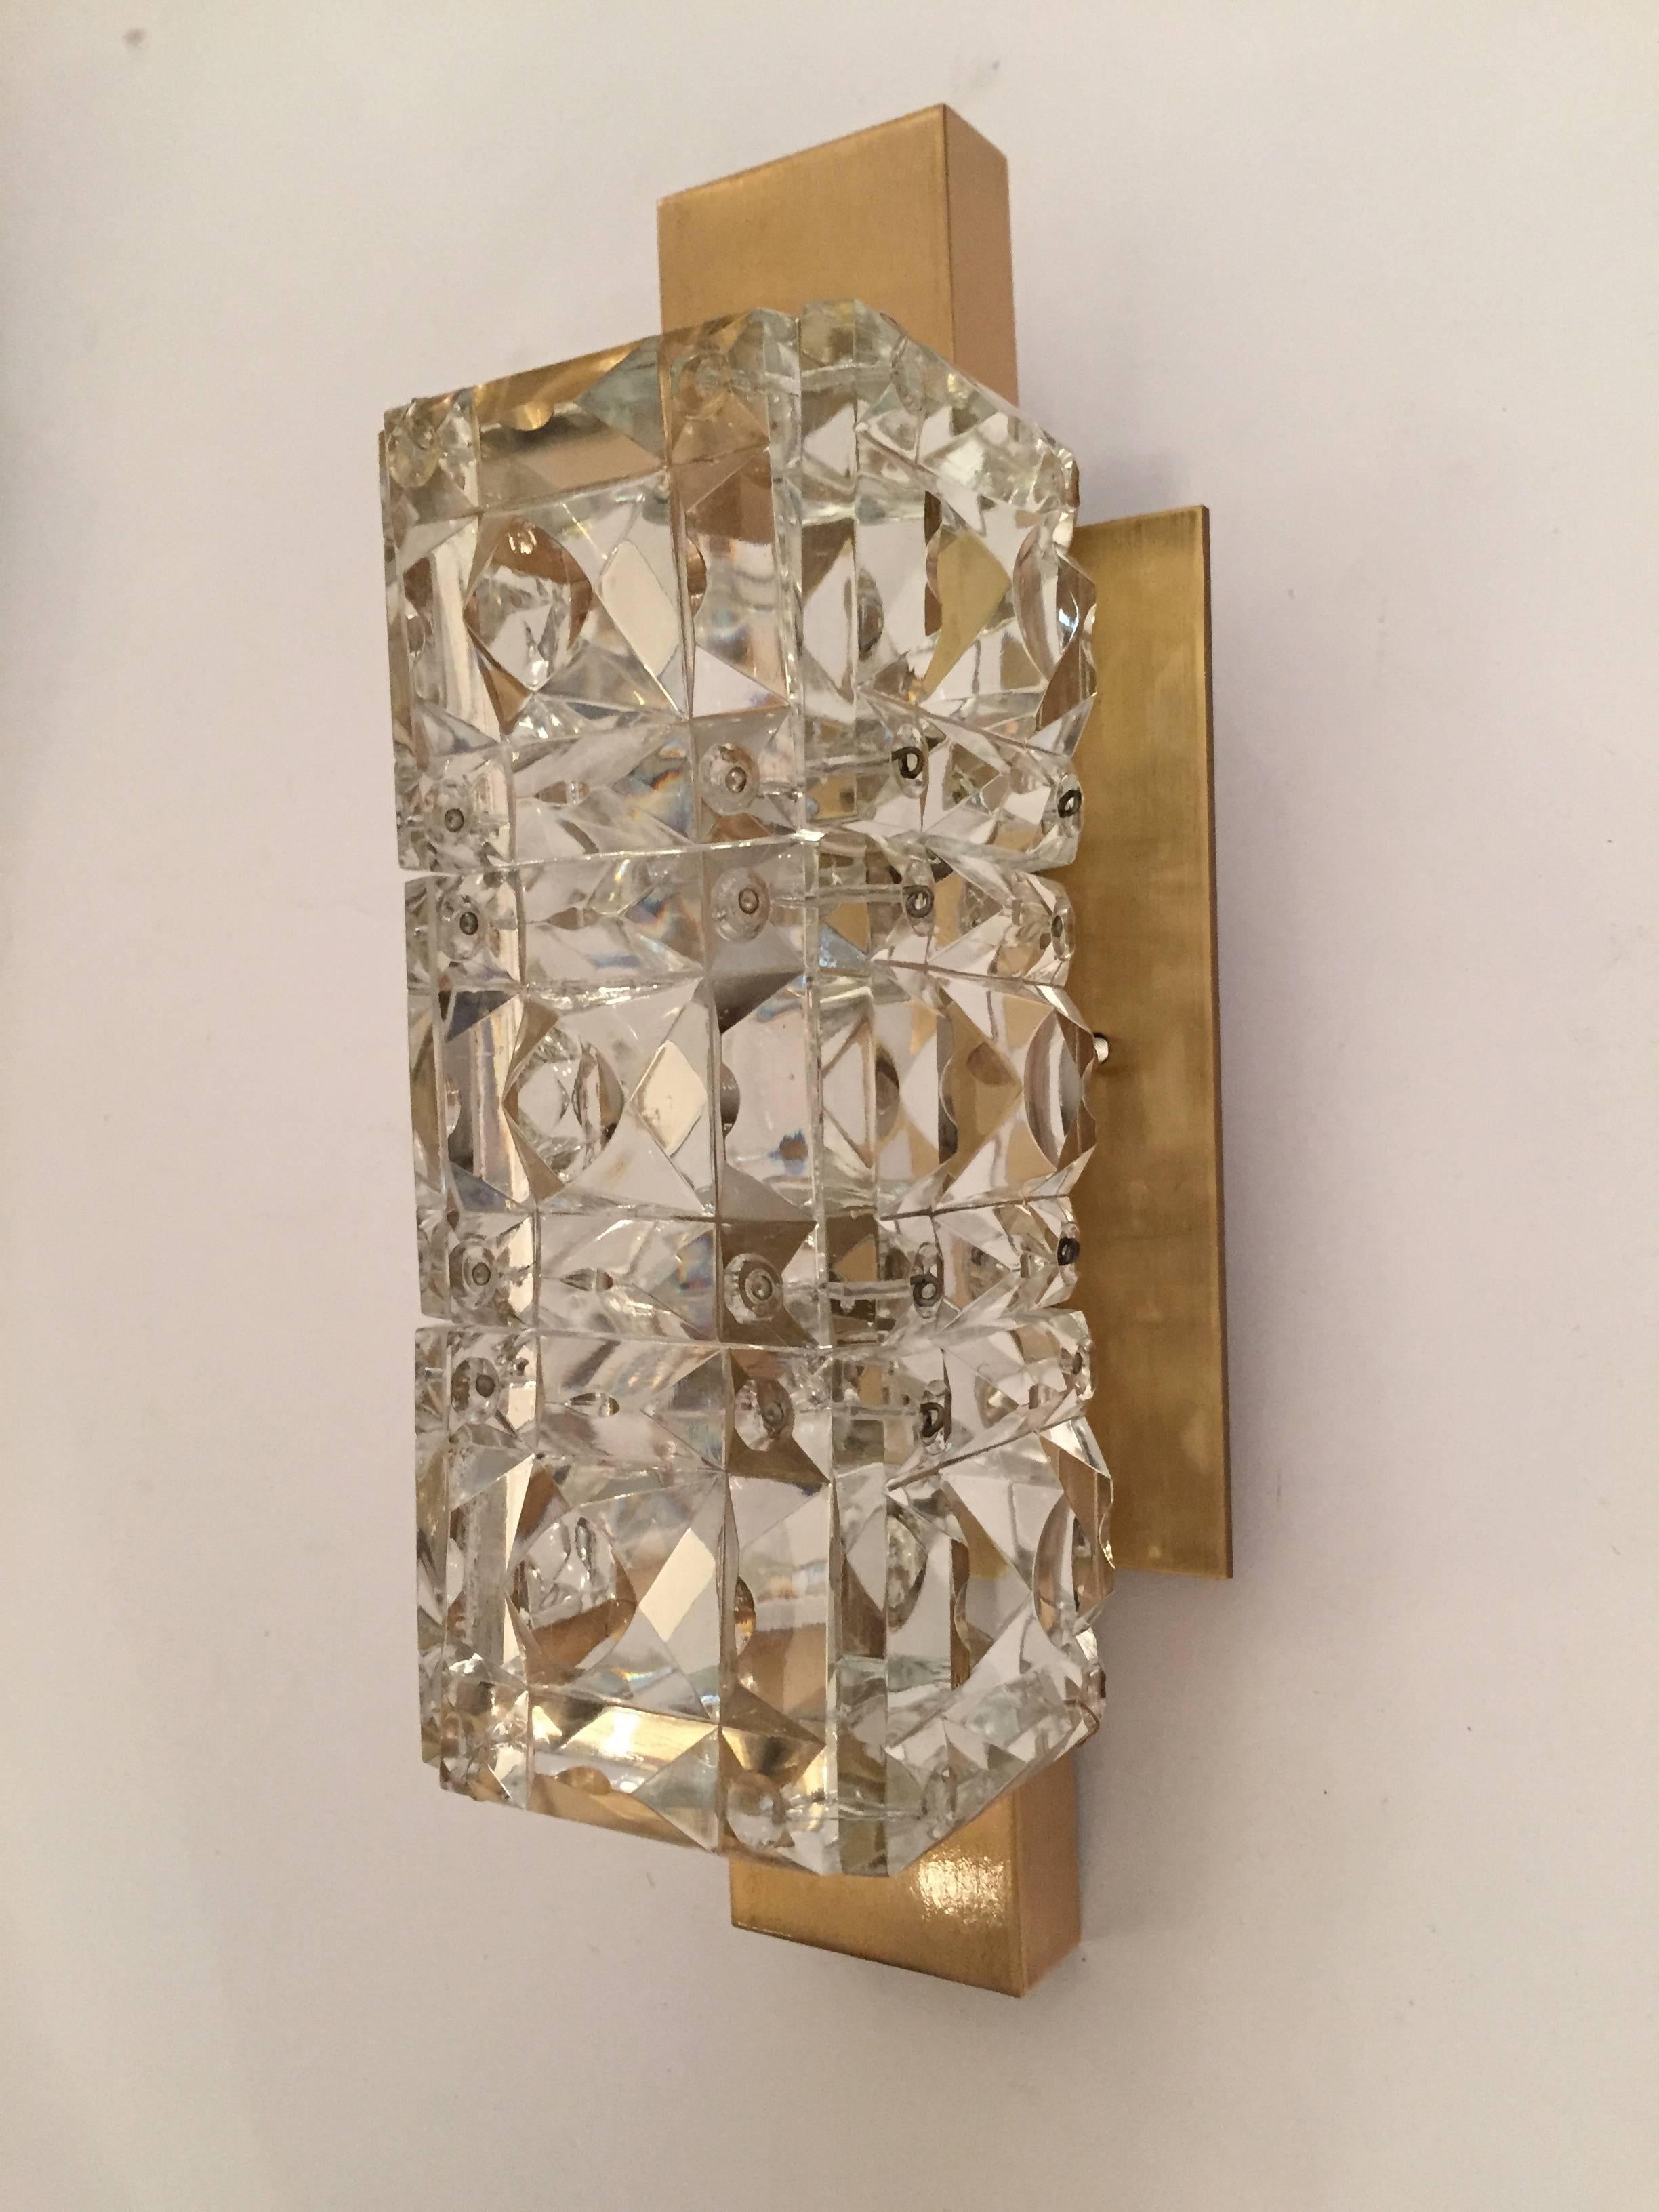 A pair of luxurious heavy Austrian crystal wall lights by the famed maker. Kinkeldey. The sparkly sconces have have brished satin brass backings which cover the standard electrical box. Rewired.